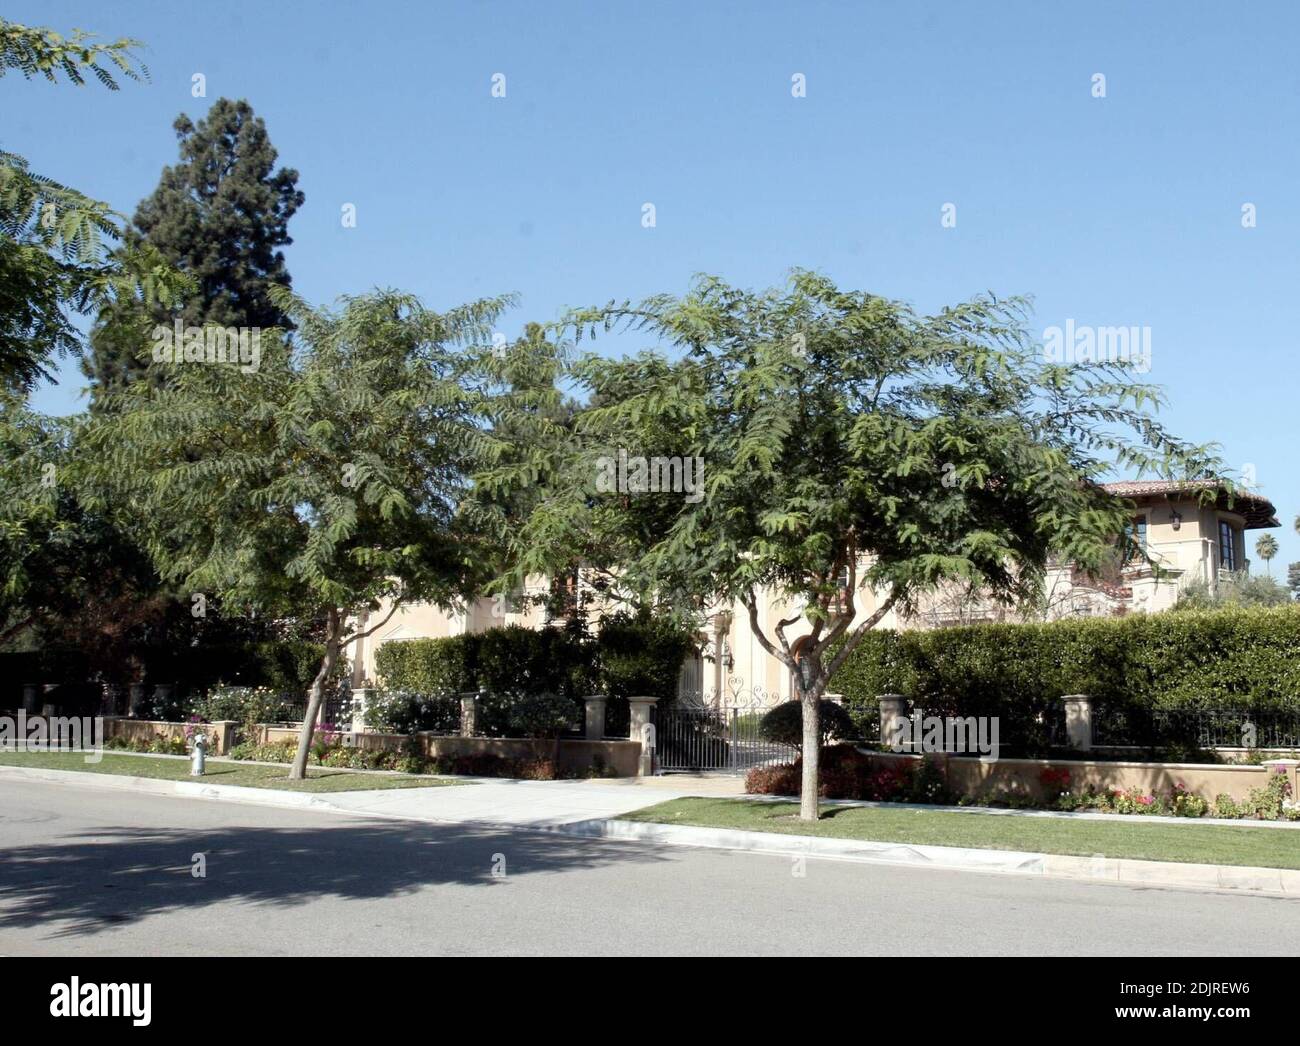 Jennifer Lopez' new Beverly Hills mansion in Ca. The plot once belonged to James 'Jimmy' Stewart but the house was demolished to make room for Lopez' multi-million dollar home. 10/21/06 Stock Photo